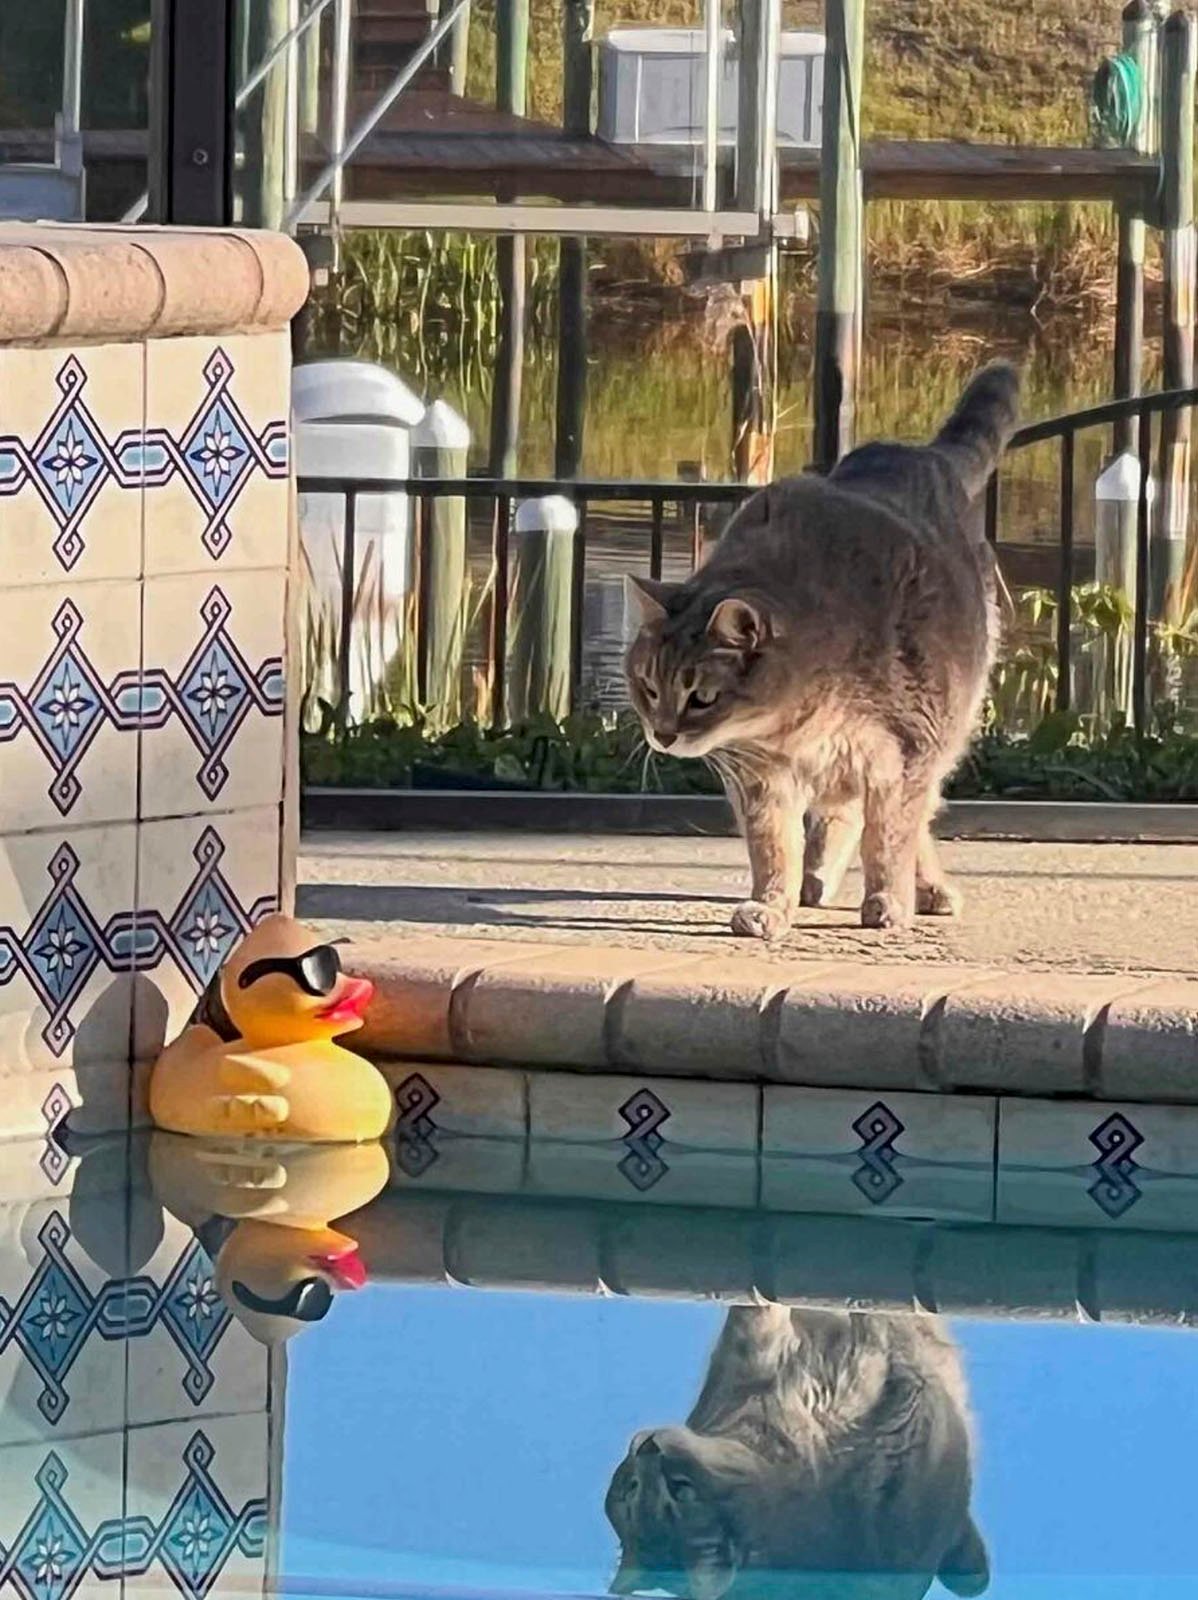 A cat cautiously approaching a rubber duck floating on the edge of a swimming pool, with its reflection visible in the water and tall reeds in the background.